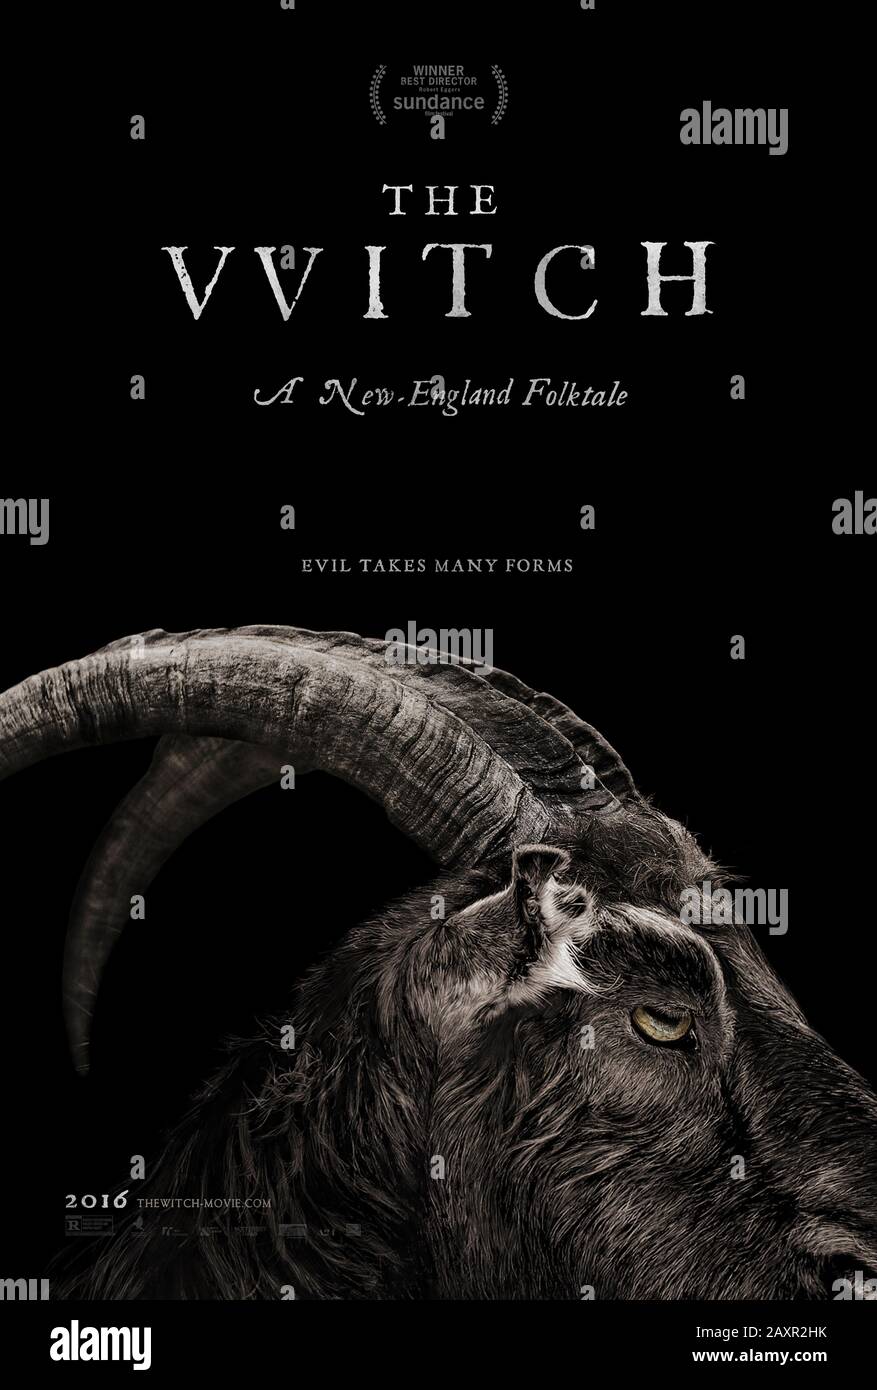 The VVitch: A New-England Folktale (2015) directed by Robert Eggers and starring Anya Taylor-Joy, Ralph Ineson, Kate Dickie and Harvey Scrimshaw. Supernatural horror set in New England in 1630 where a Christian family is forced to confront true evil. Stock Photo